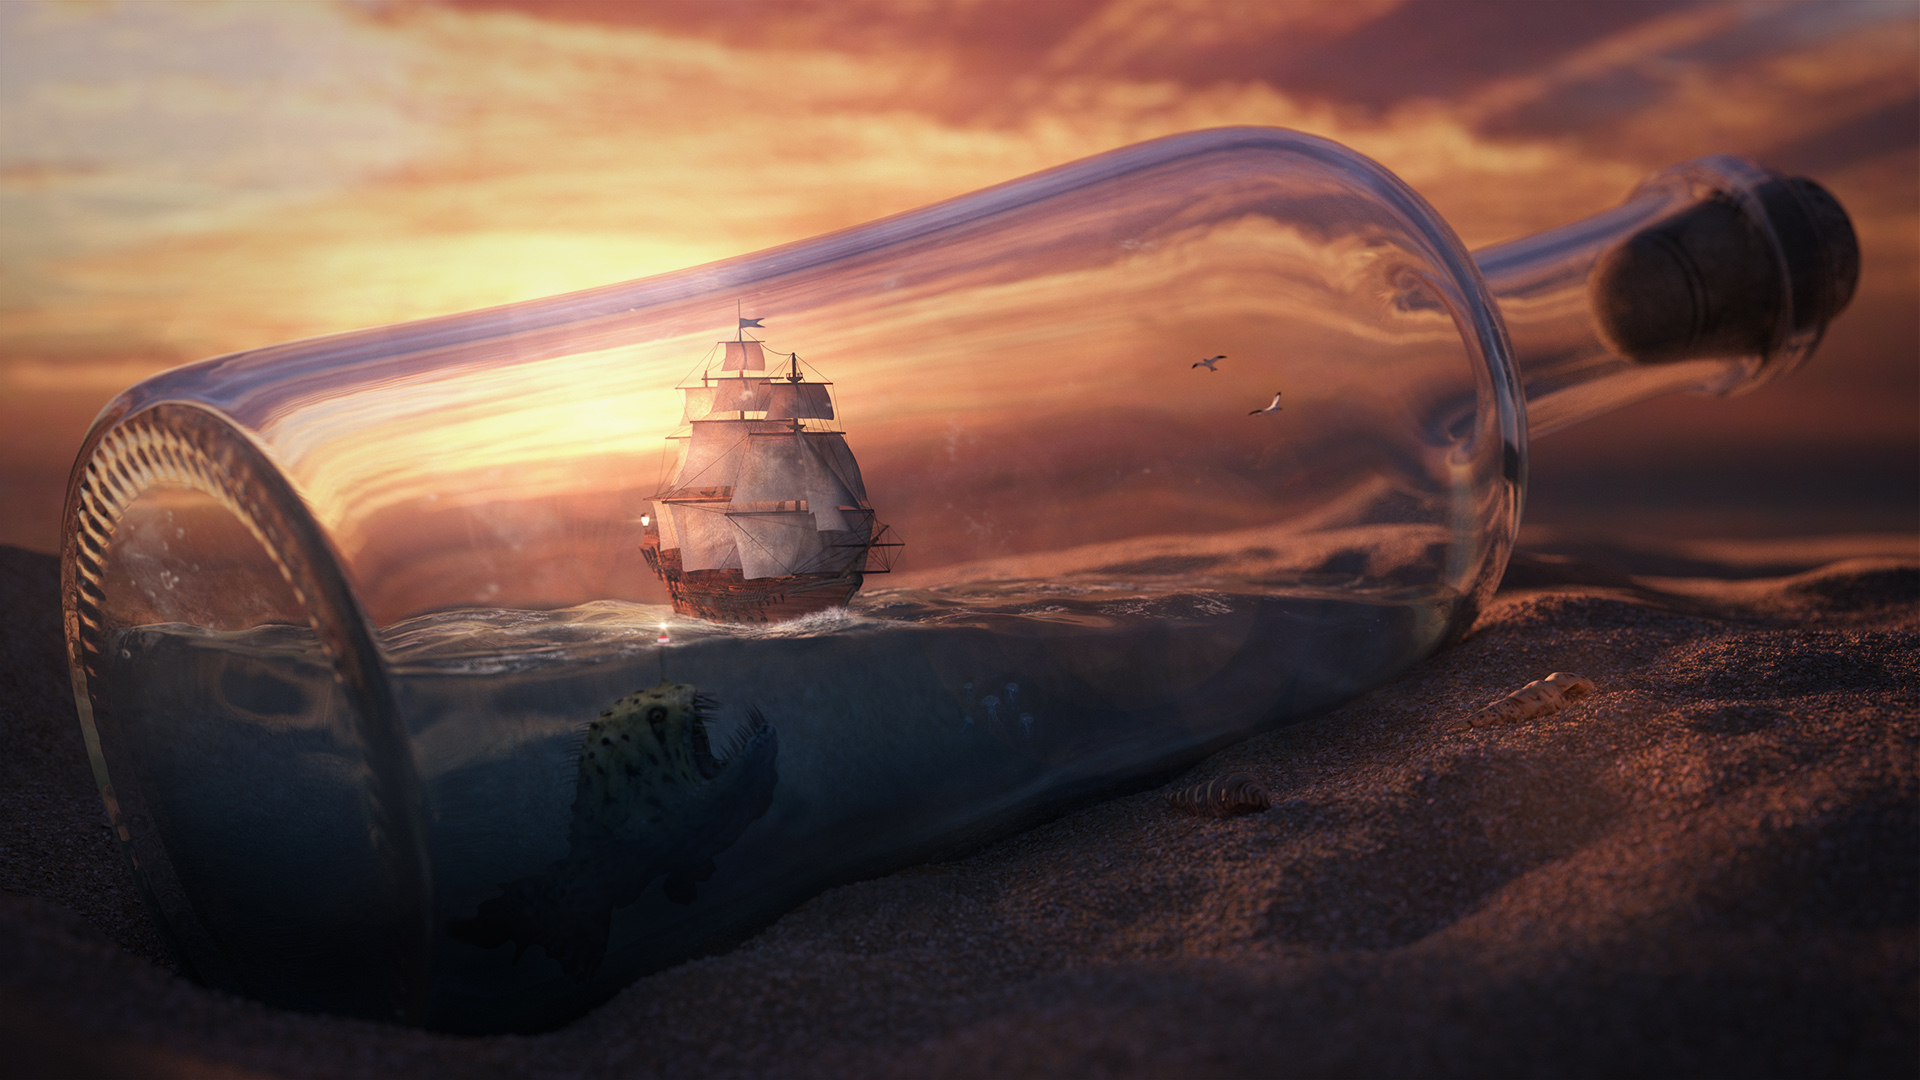 Ship in a bottle - Free miscellaneous icons